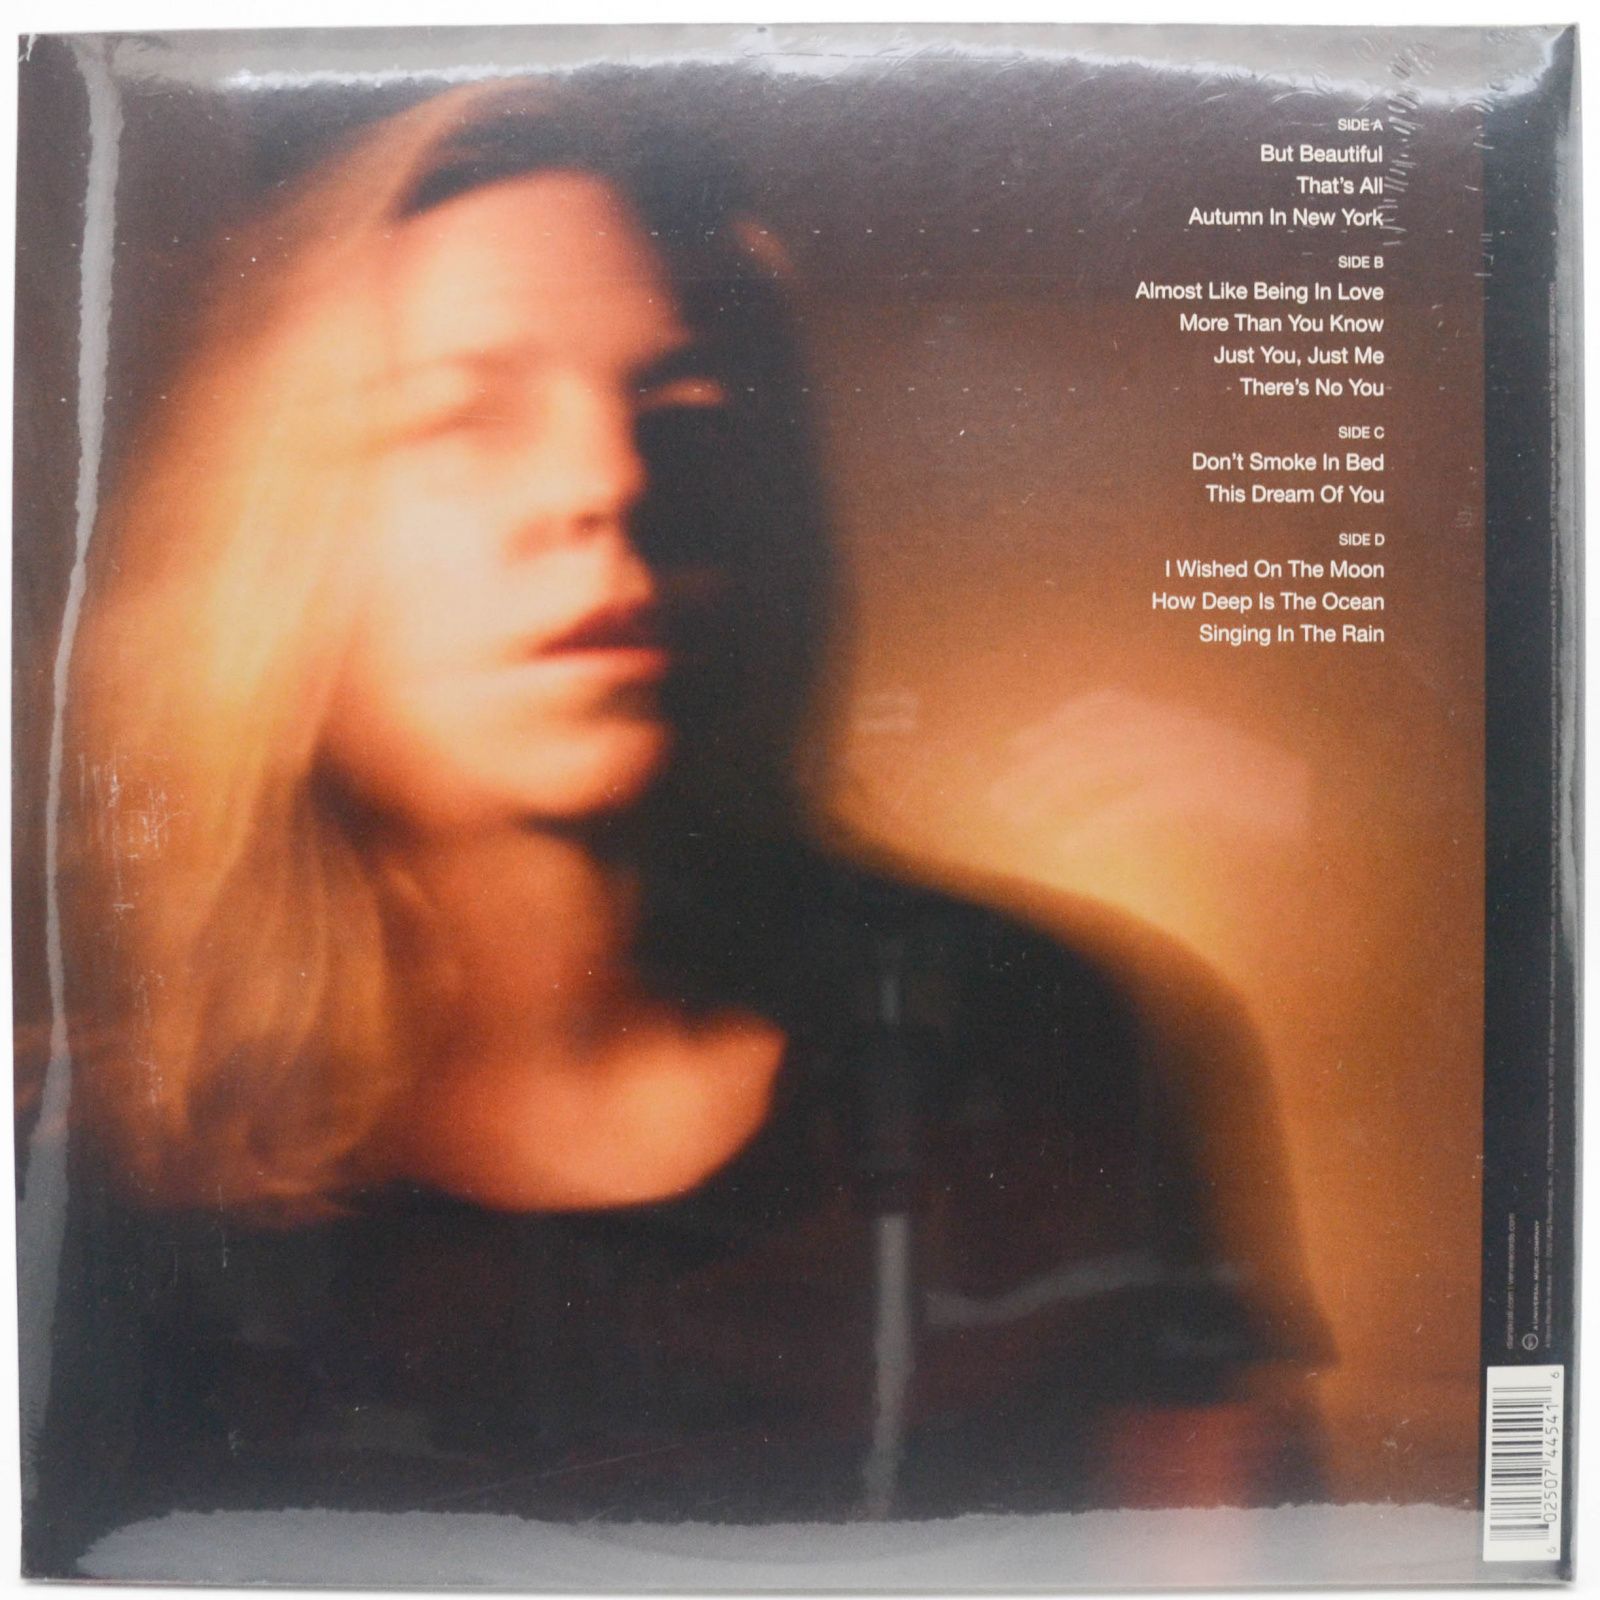 Diana Krall — This Dream Of You (2LP), 2020